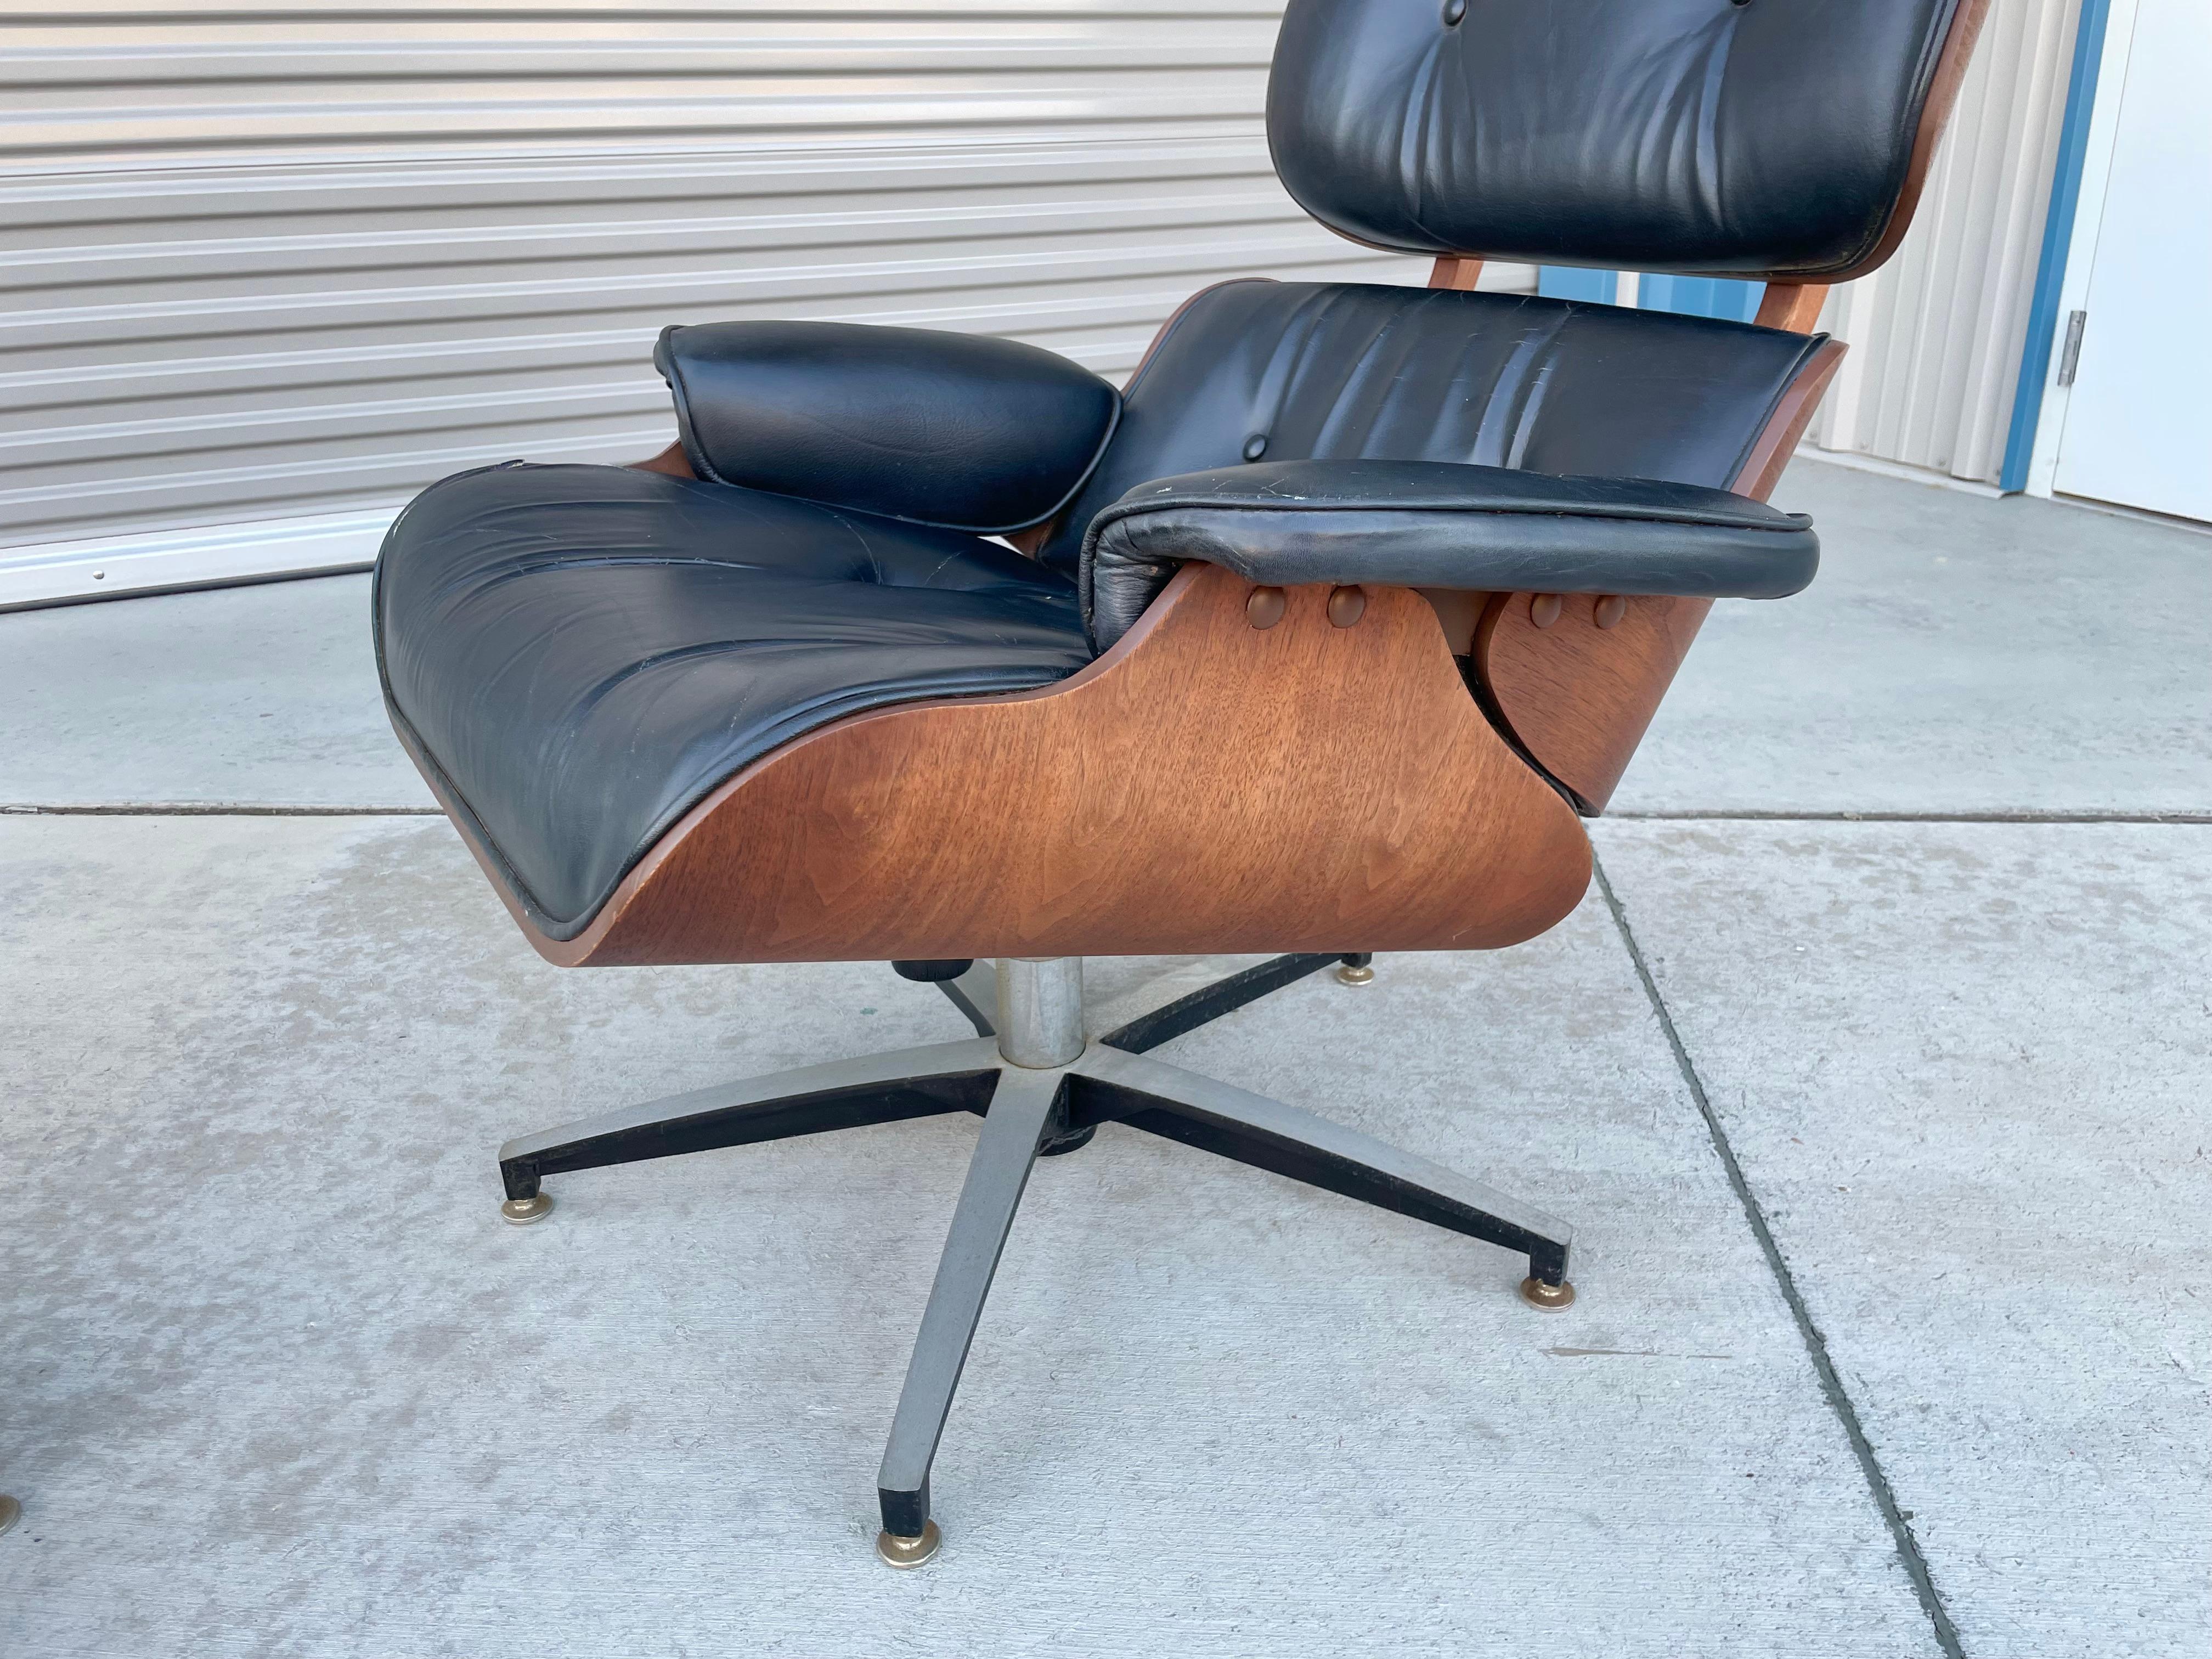 1960s Mid Century Chair and Ottoman Styled After Herman Miller In Good Condition For Sale In North Hollywood, CA